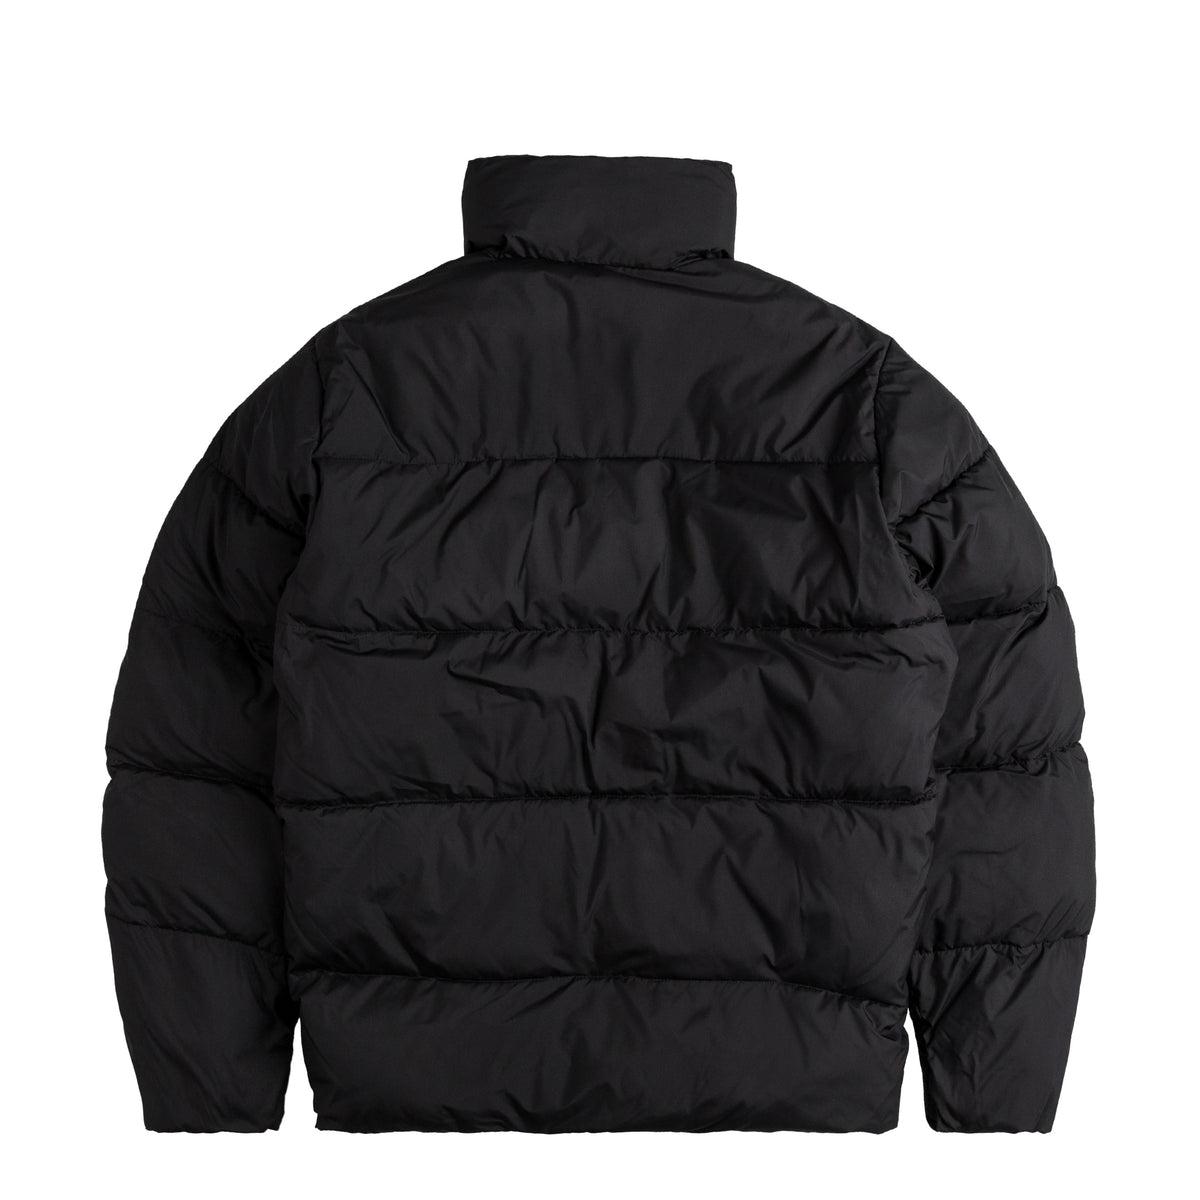 Carhartt WIP Springfield Jacket – buy now at Asphaltgold Online Store!